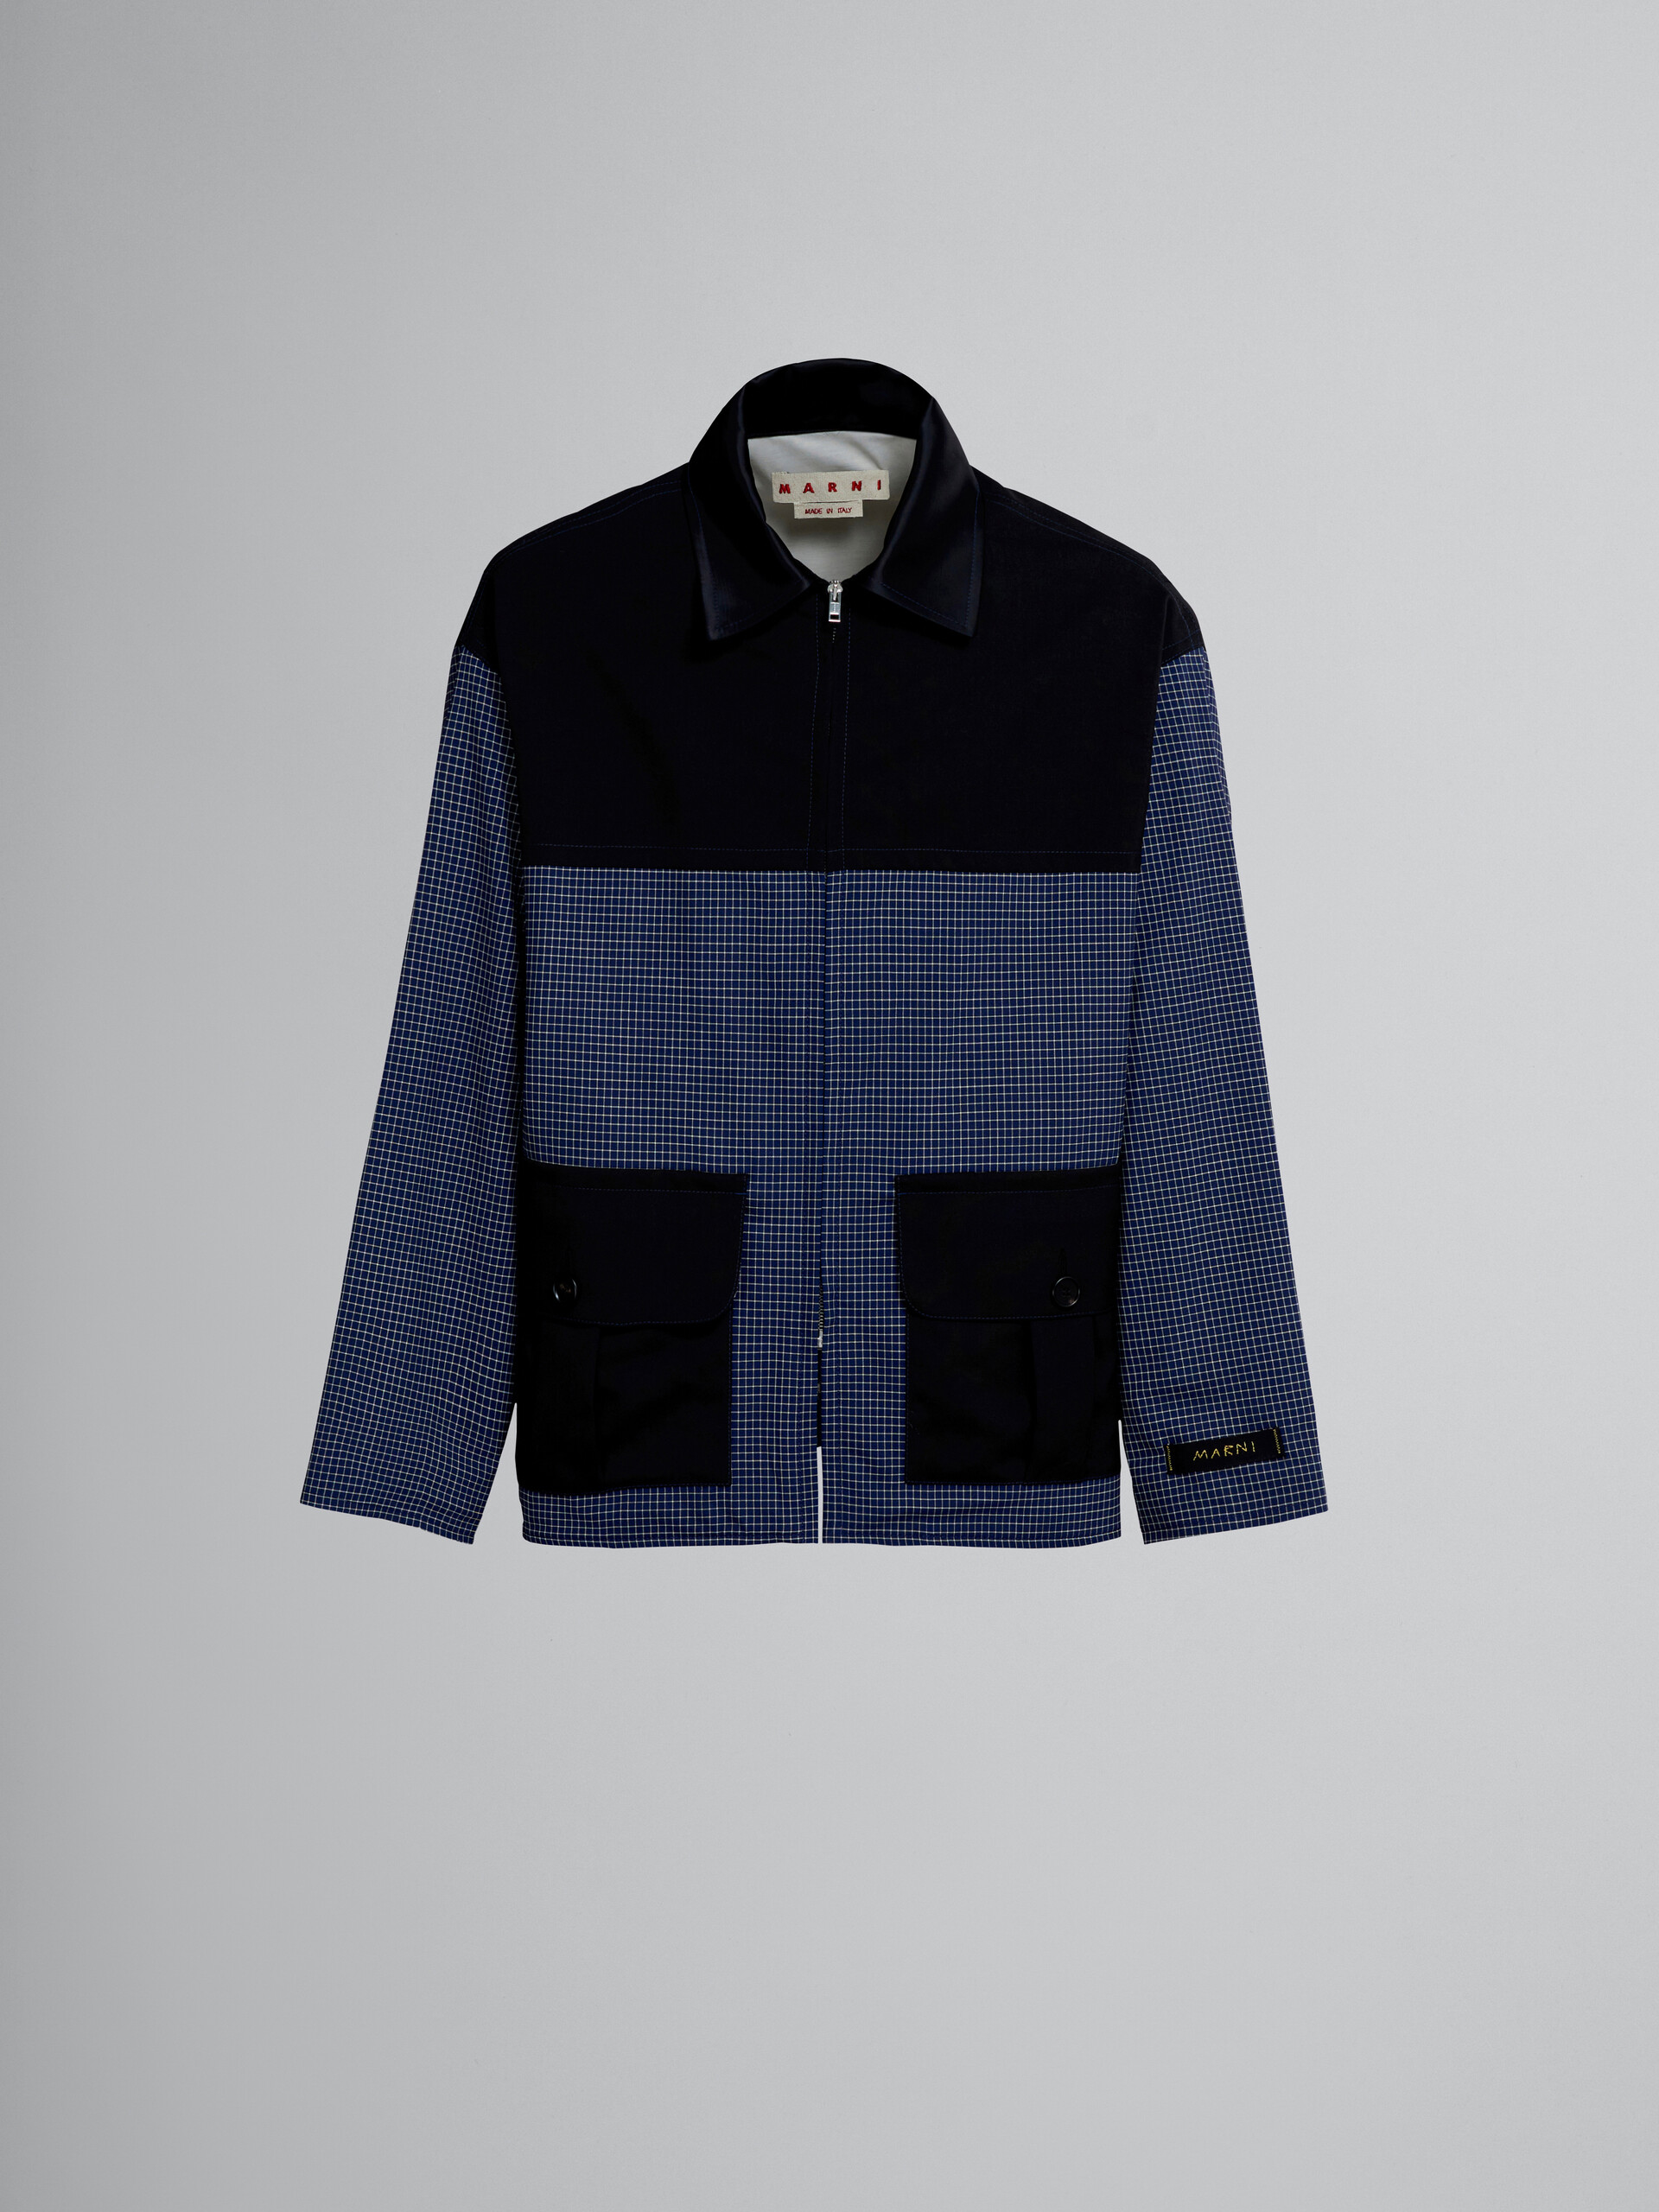 Jacket in tropical wool with blue checks - Jackets - Image 1